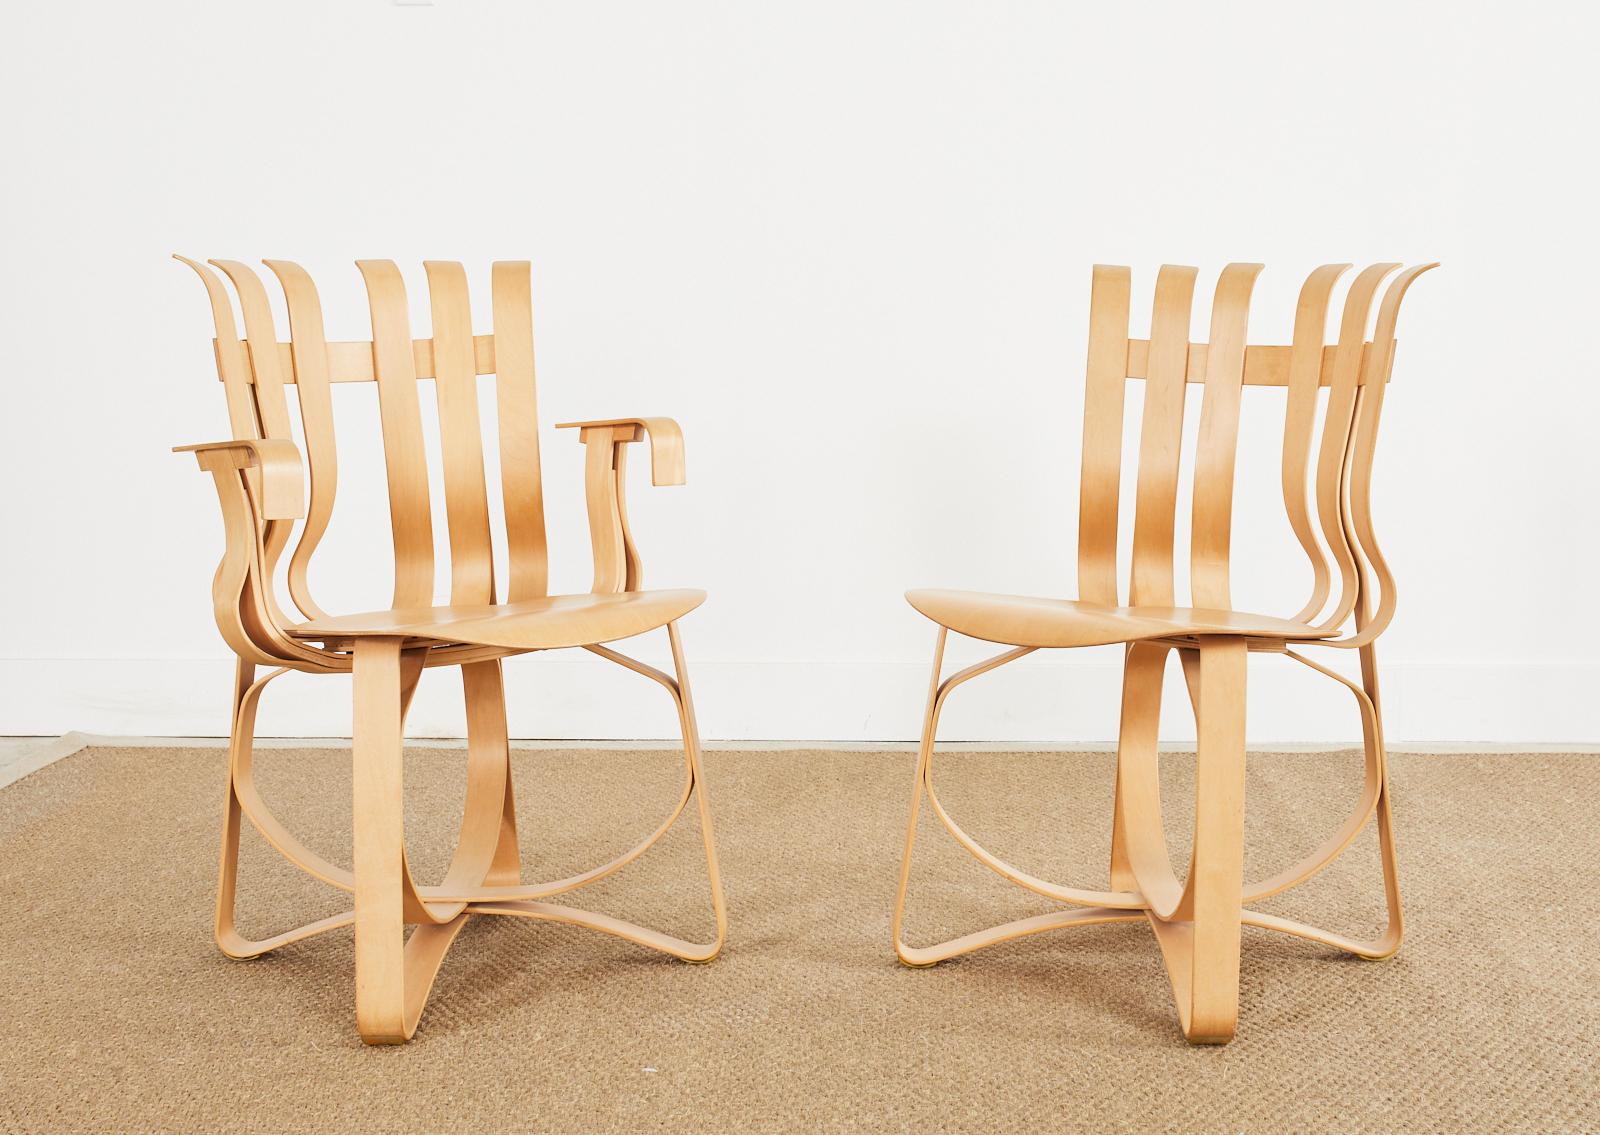 Iconic pair of maple plywood hat trick chairs designed by Frank Gehry for Knoll. Each beautiful chair is signed and dated on bottom. Constructed on 8-7-1993 and 8-`4-1993. The set consists of one armchair and one dining chair. The later measuring 19